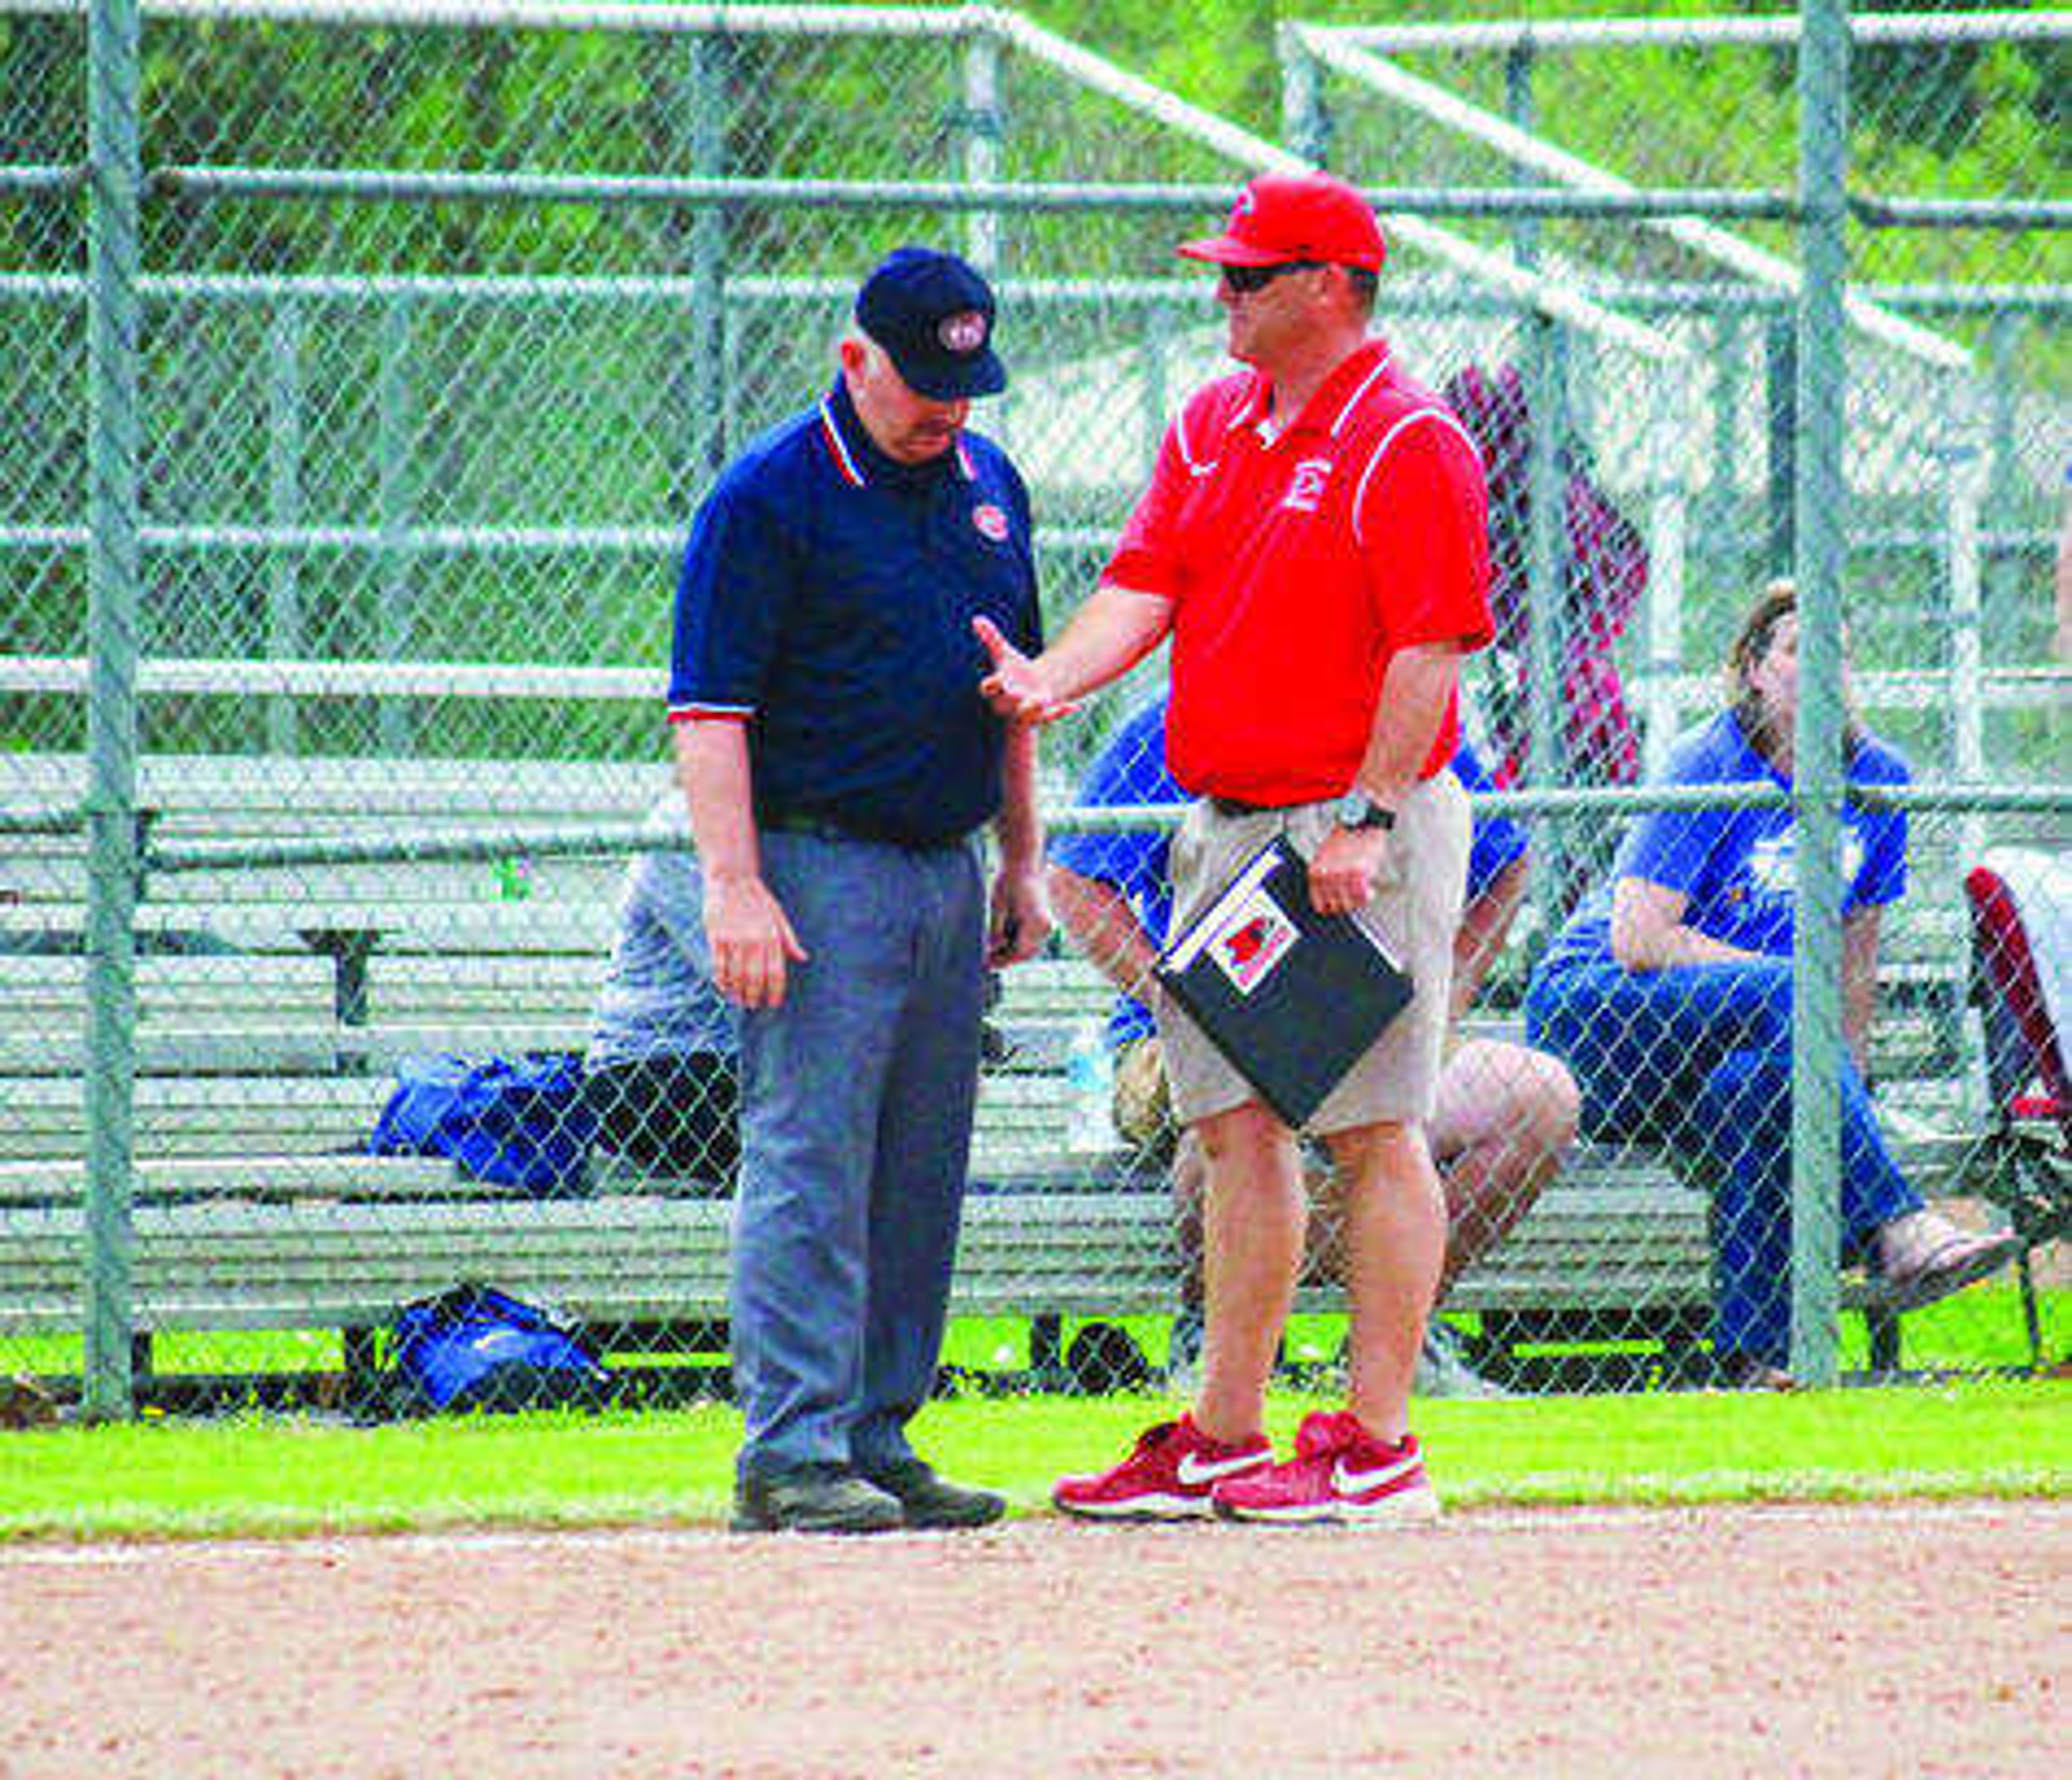 First-year Southeast Missouri State softball coach Mark Redburn has a discussion with an official during game two of the doubleheader on Saturday. Photo by Doc Fiandaca